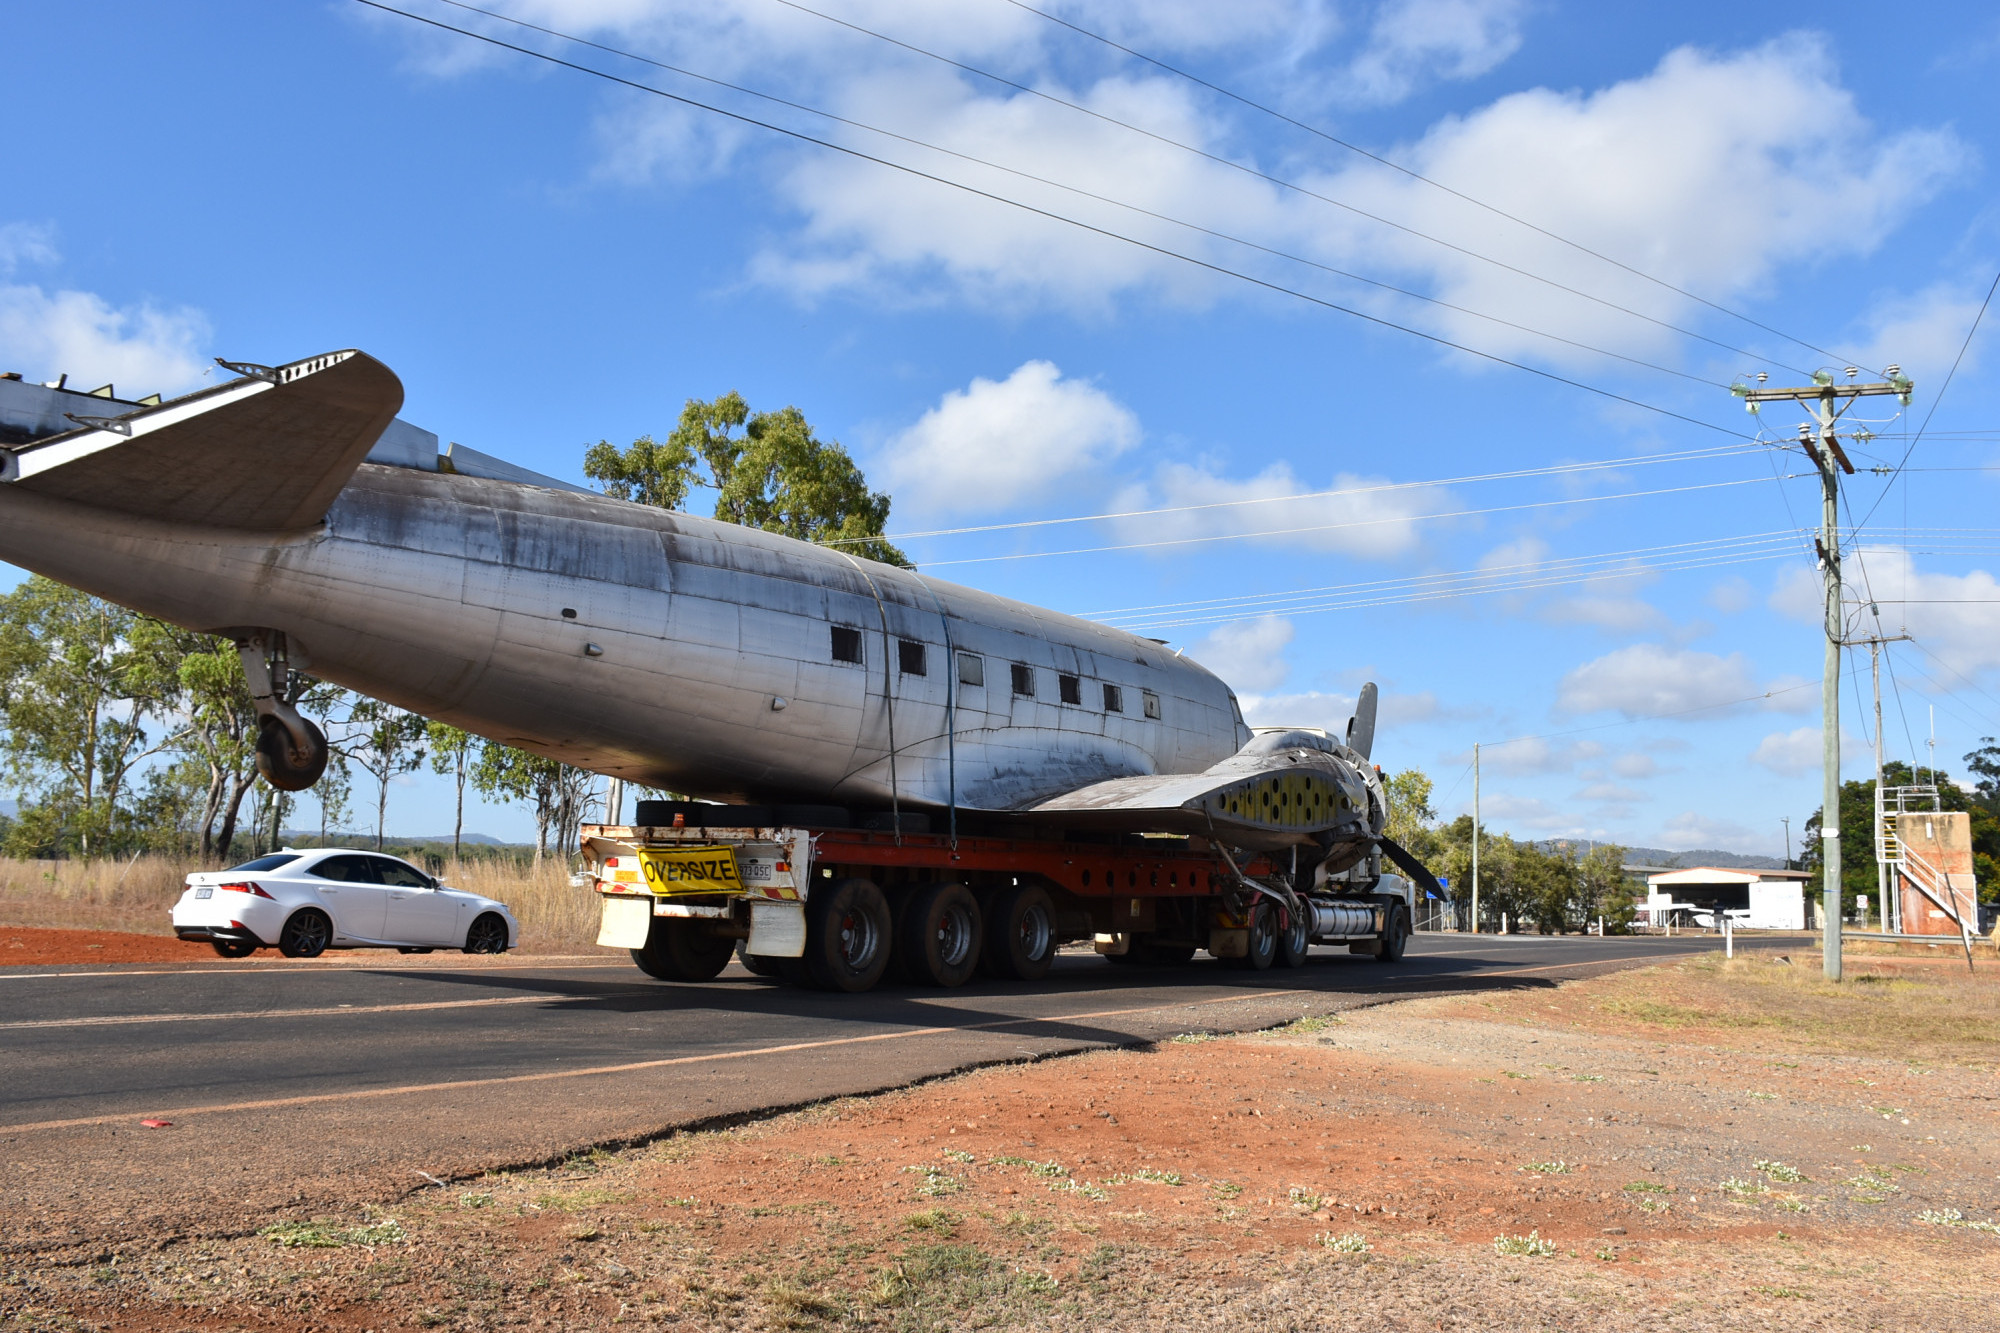 The FNQ Aviation Museum has recently acquired a Military Issue DC3 transport plane that saw the end of WWII and will soon be on display at their museum.